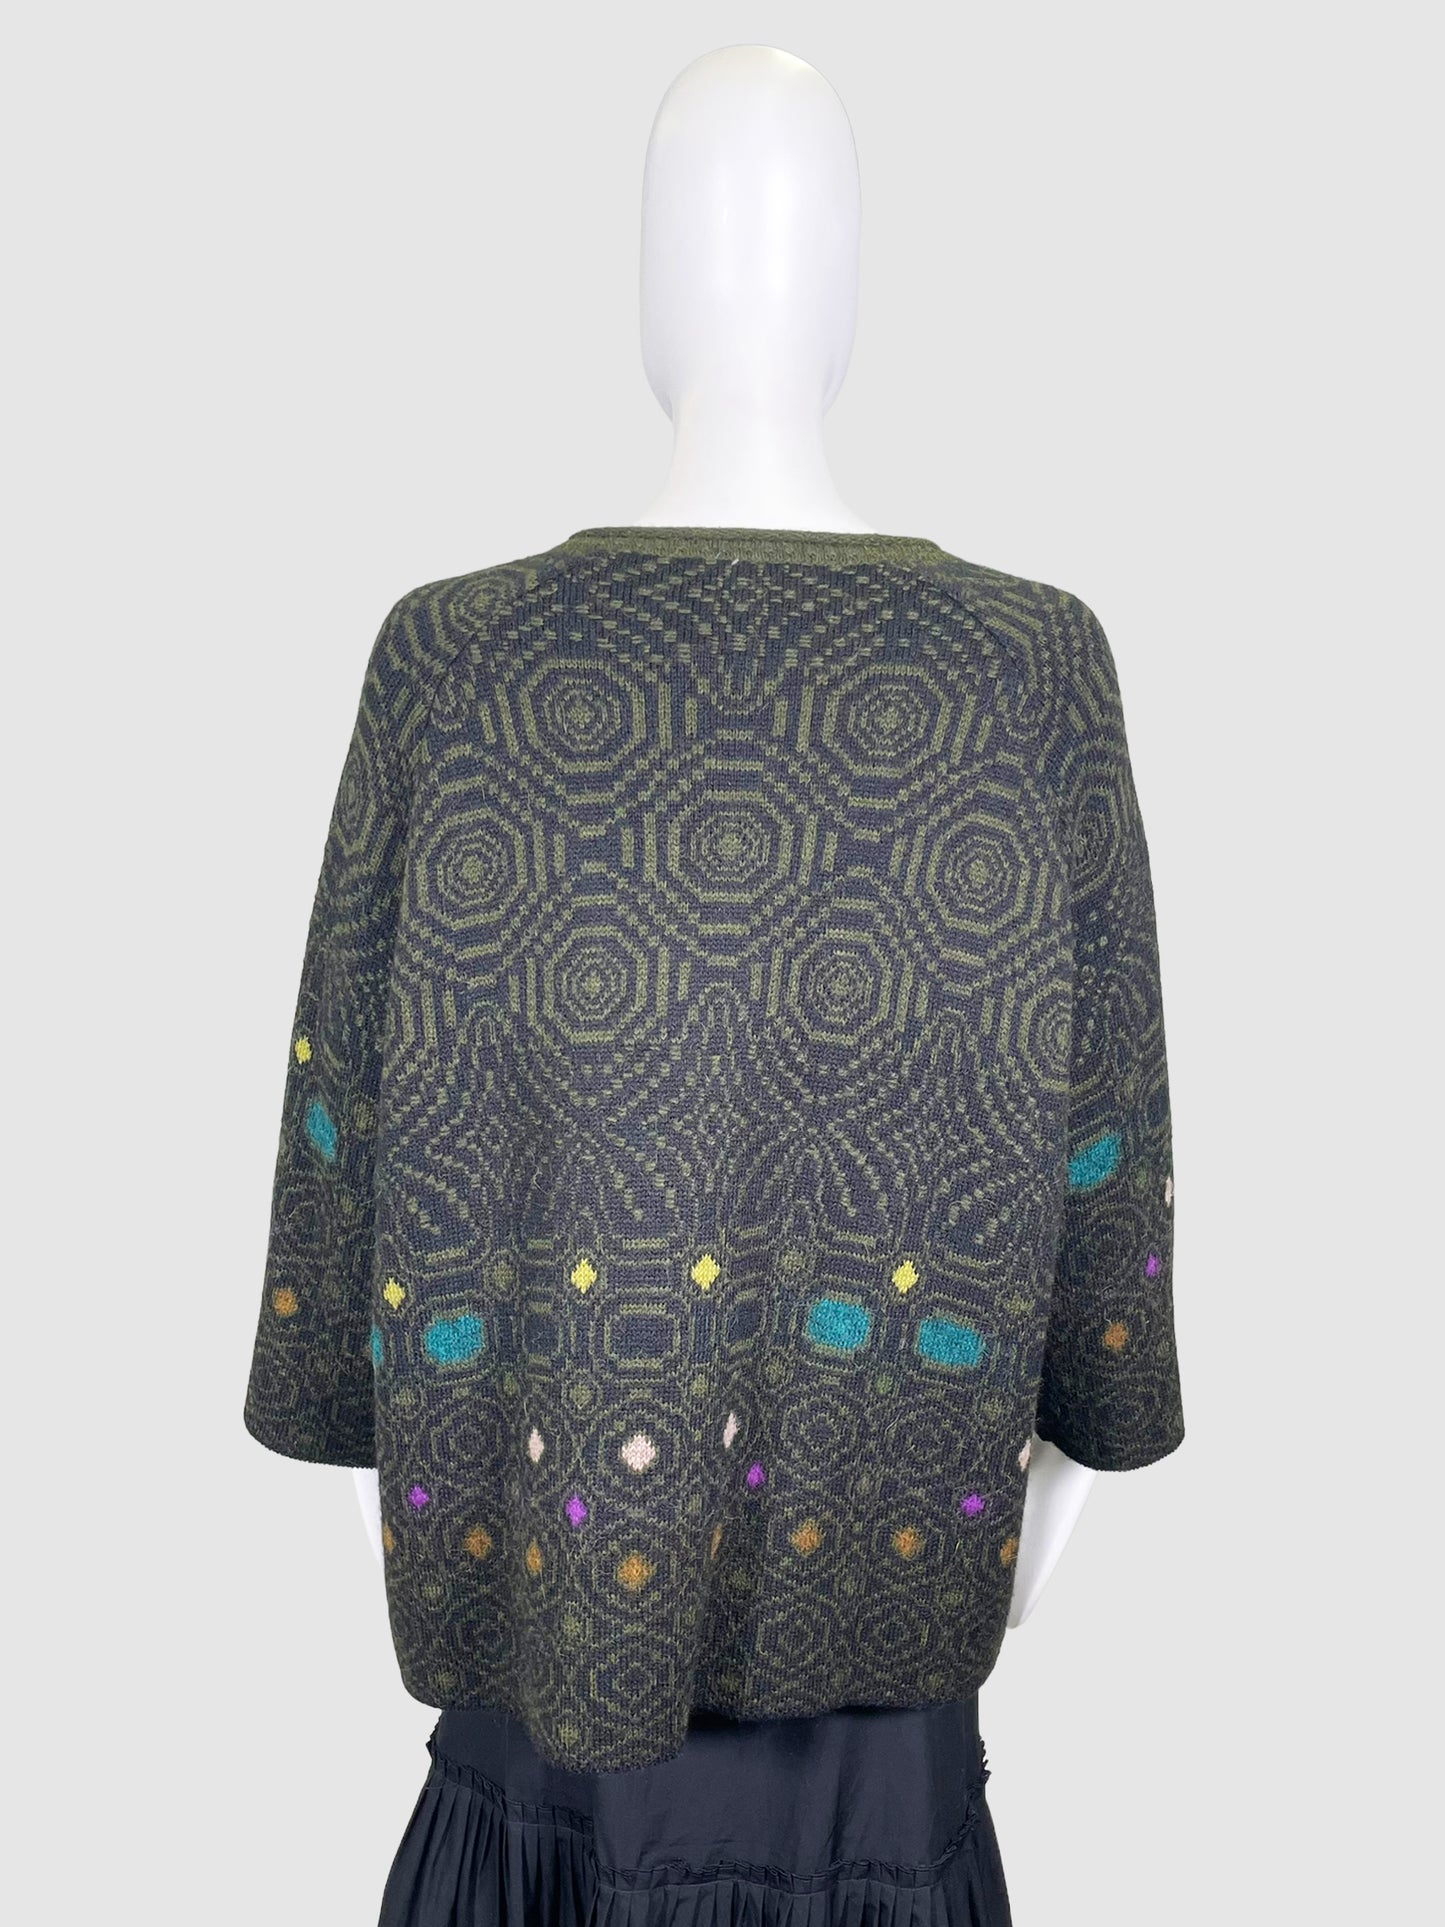 Catherine André Spotted Cardigan - Size M/L